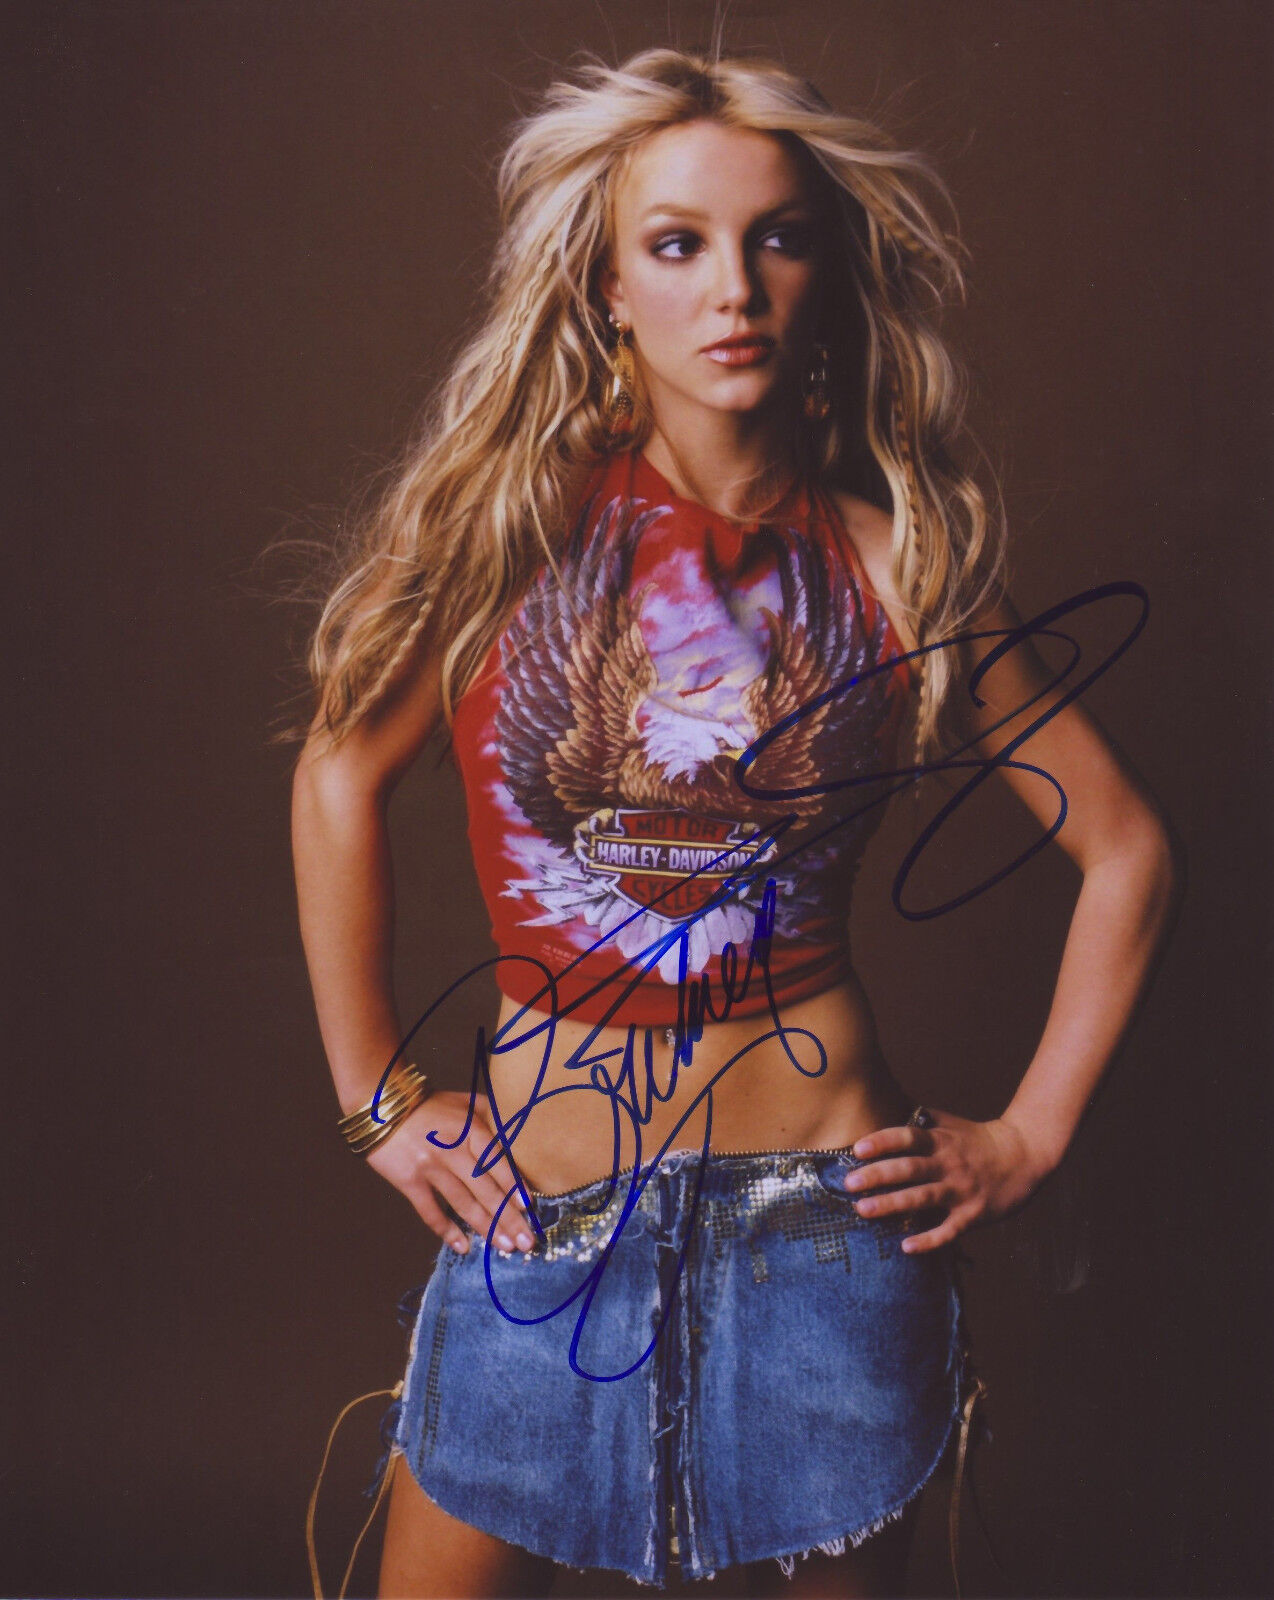 BRITNEY SPEARS AUTOGRAPH SIGNED PP Photo Poster painting POSTER 24